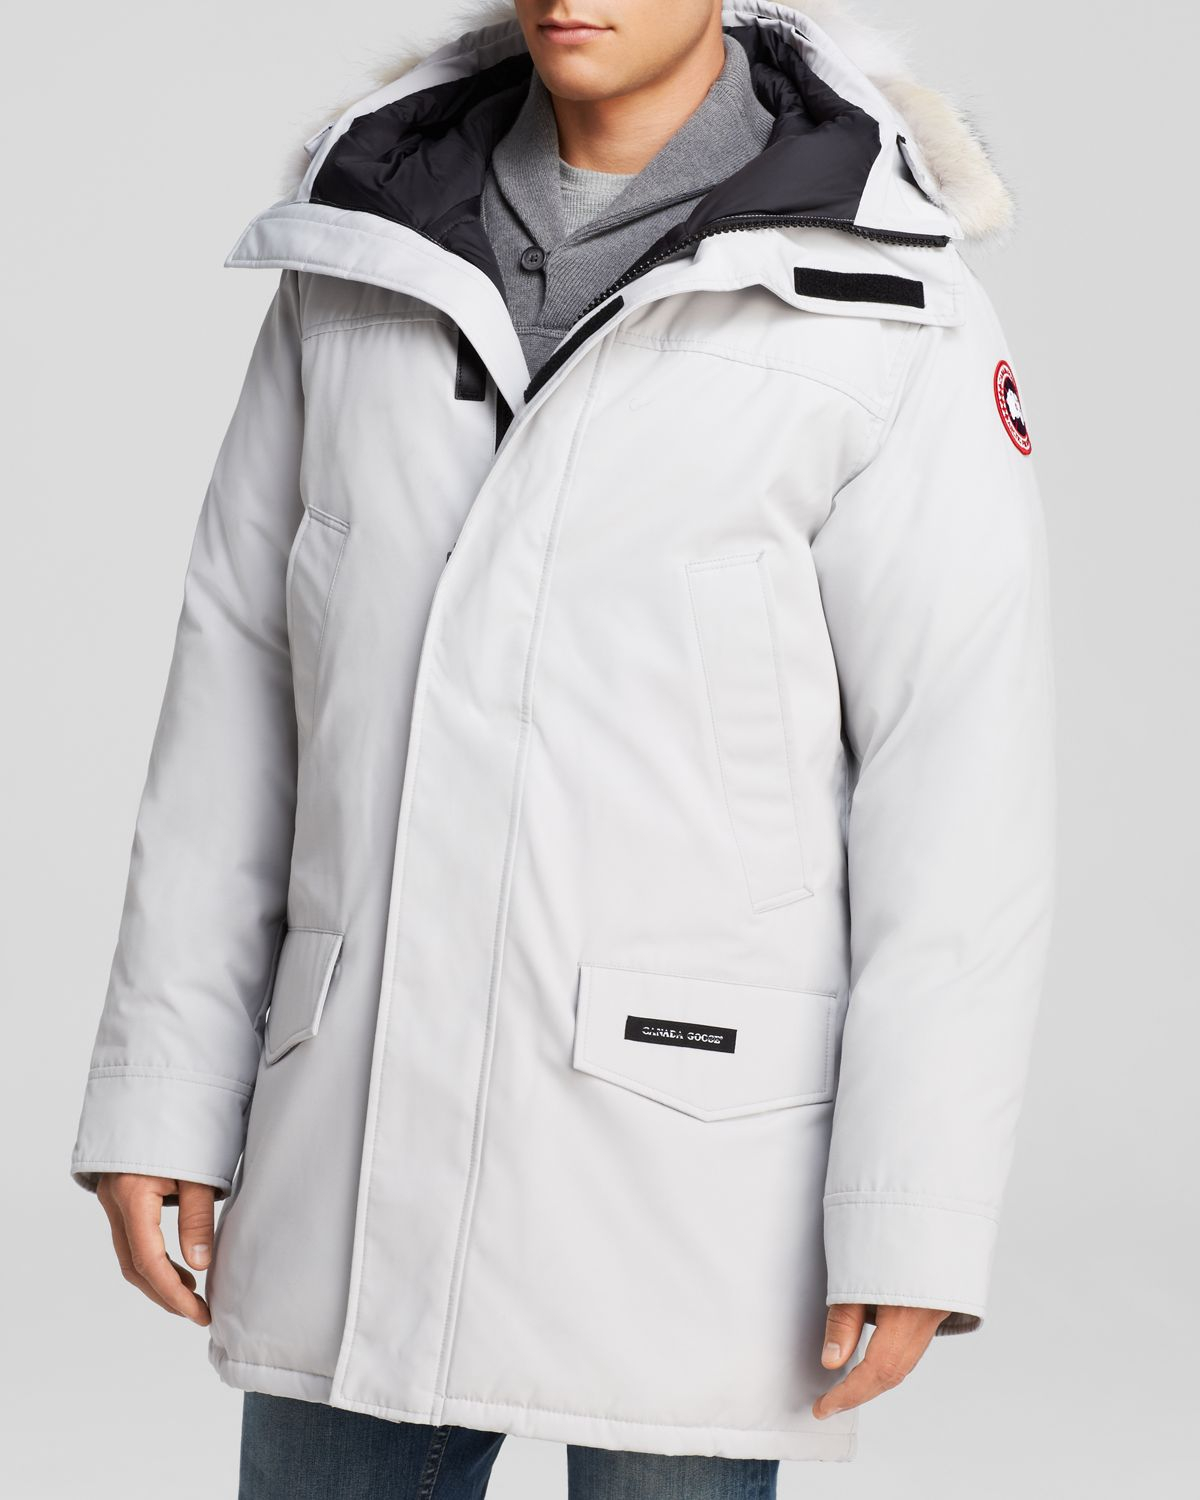 Canada Goose vest online authentic - Perfect Online Shop To Buy Canada Goose Vs Geese New Styles & Colors